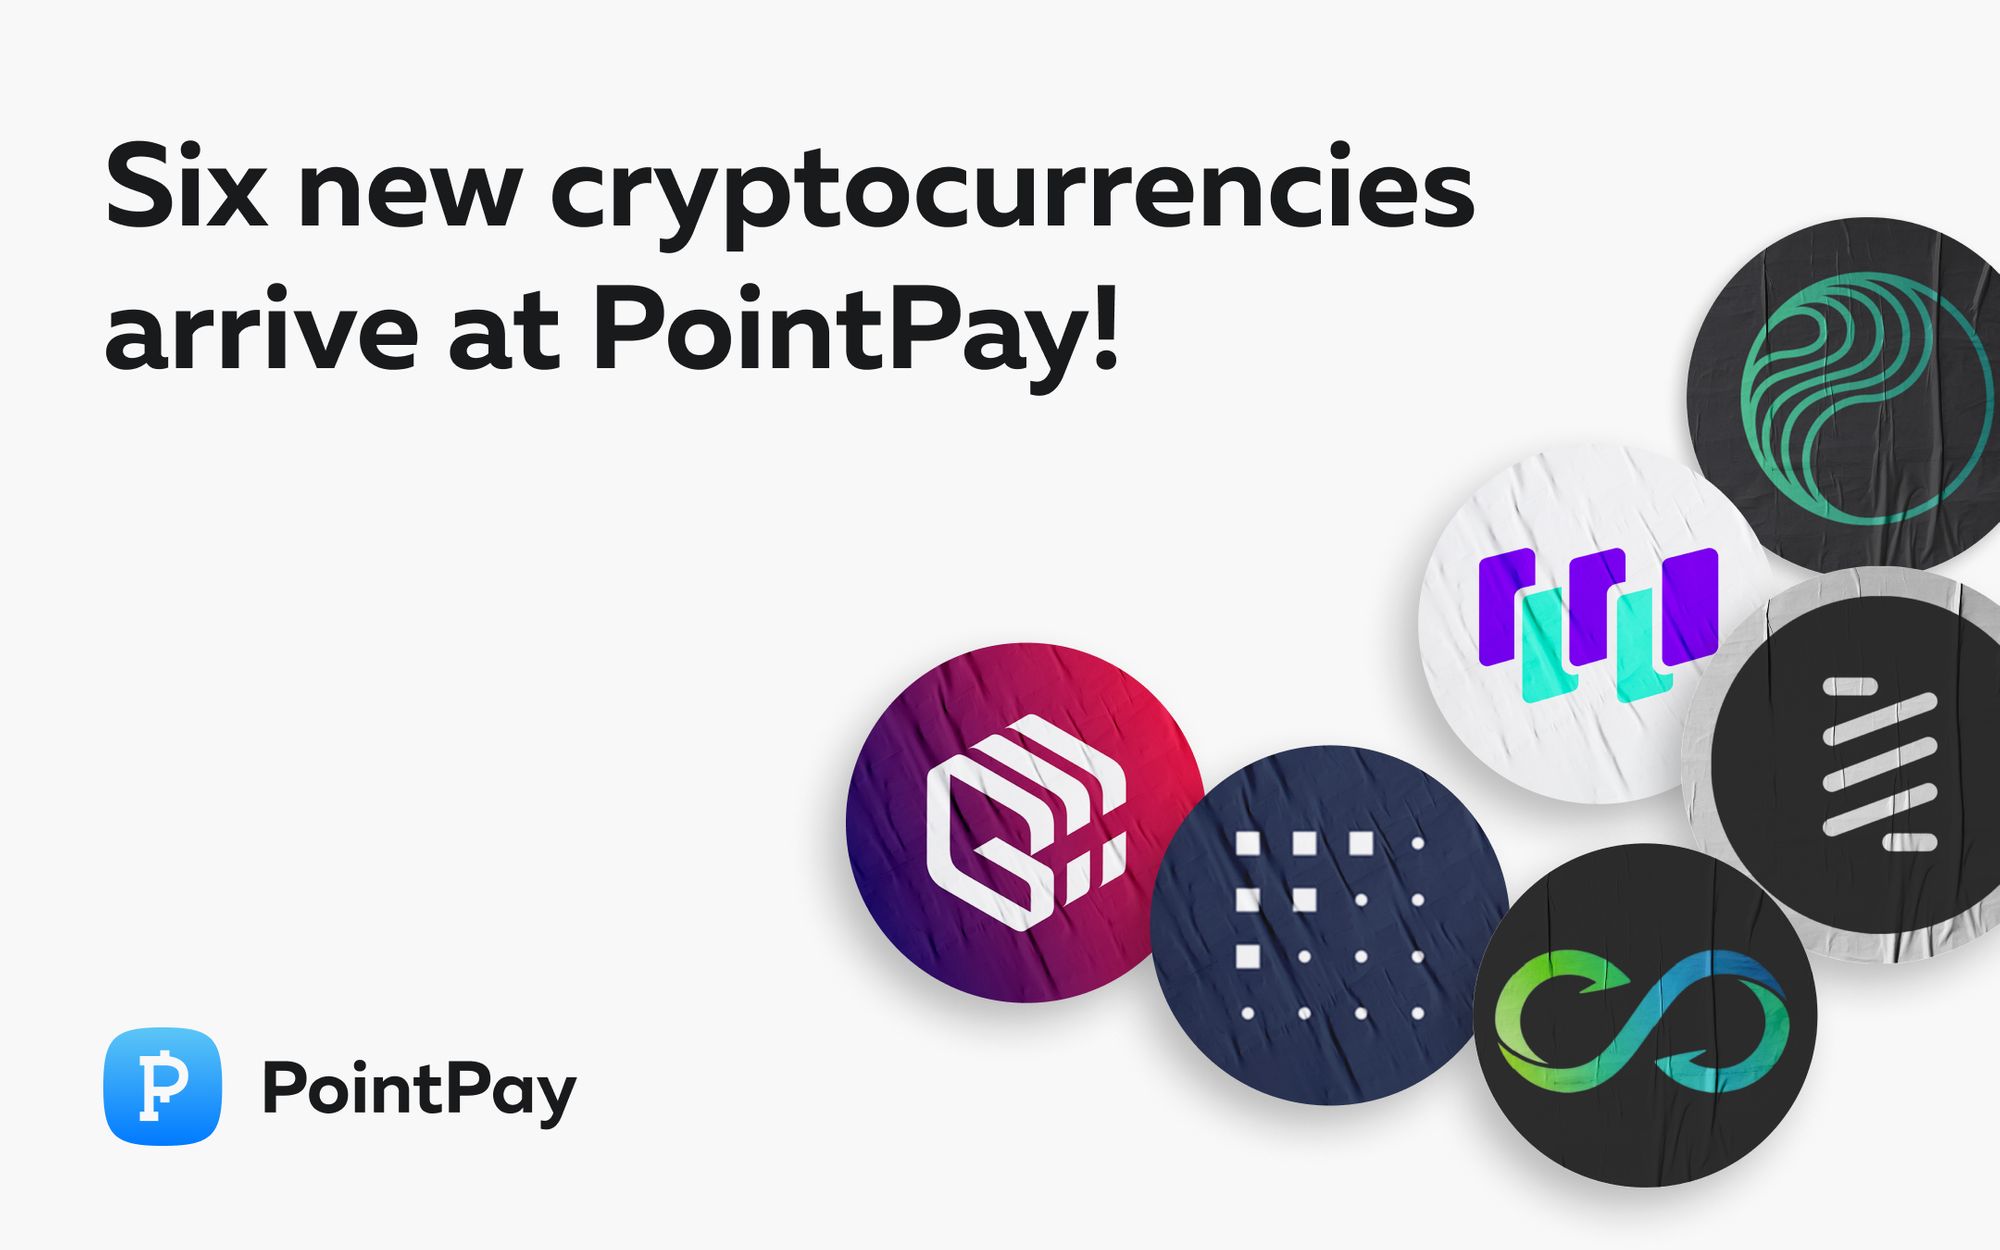 Introducing 6 New Assets on the PointPay Platform!